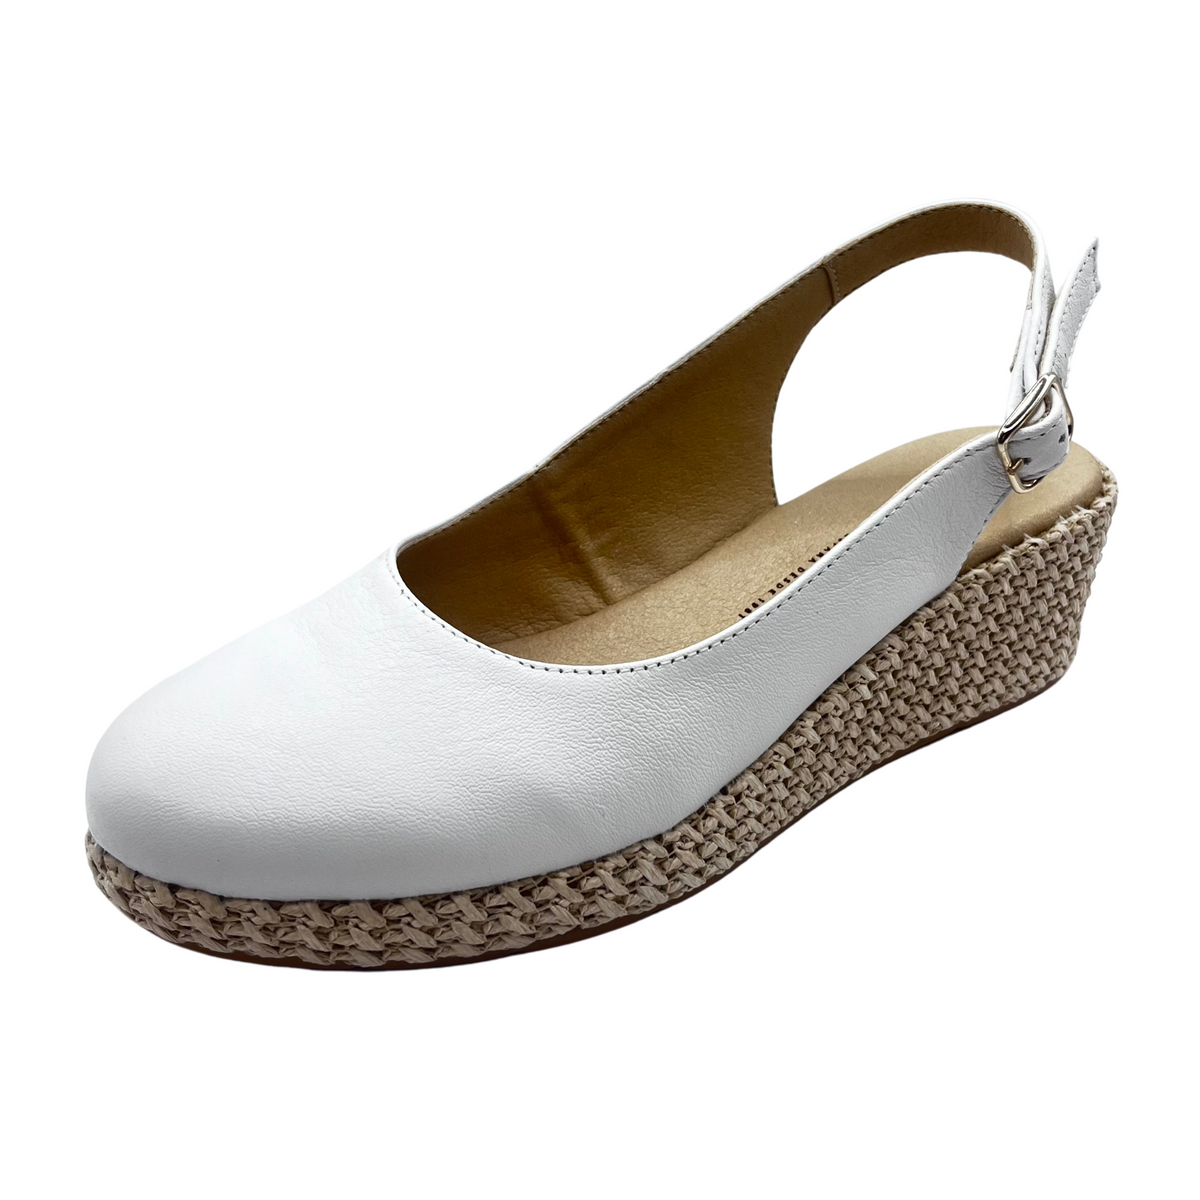 Pitillos White Leather Wedge Sandals